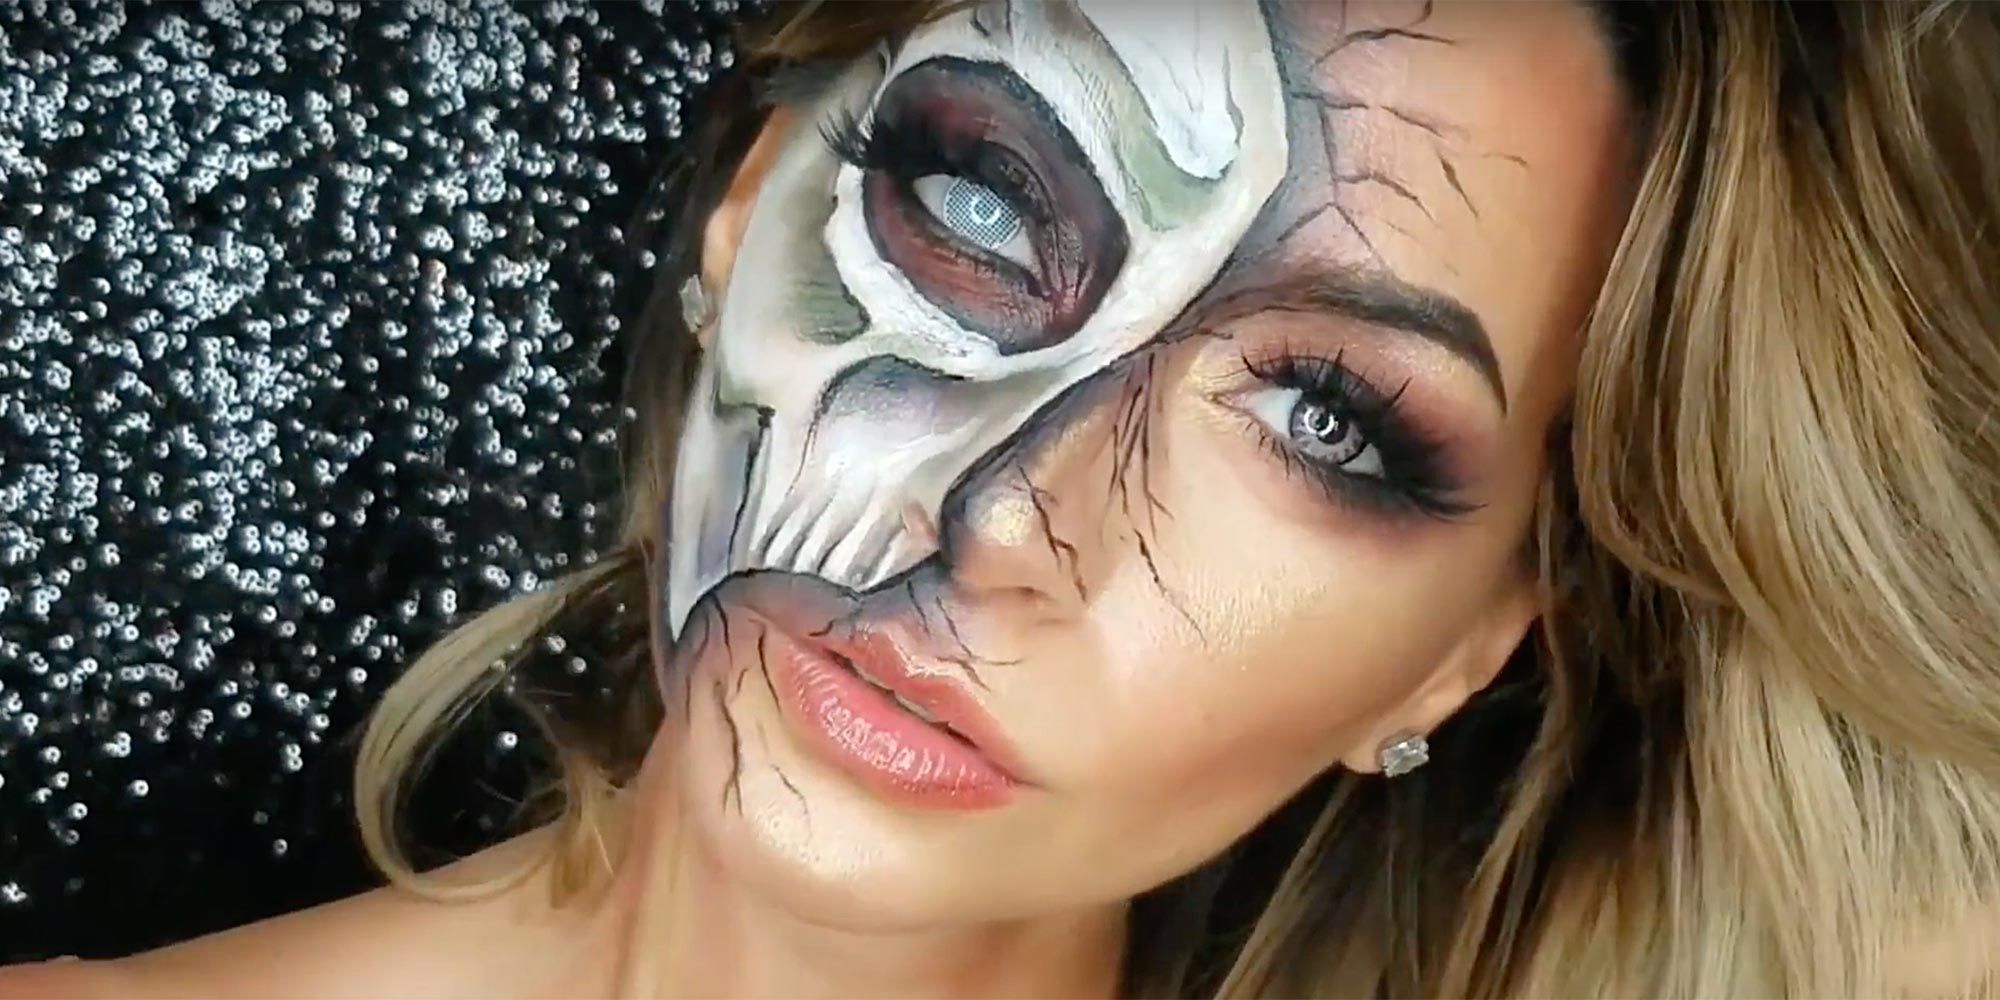 This Half Face Zombie Makeup Look Is The Trippiest Halloween Costume